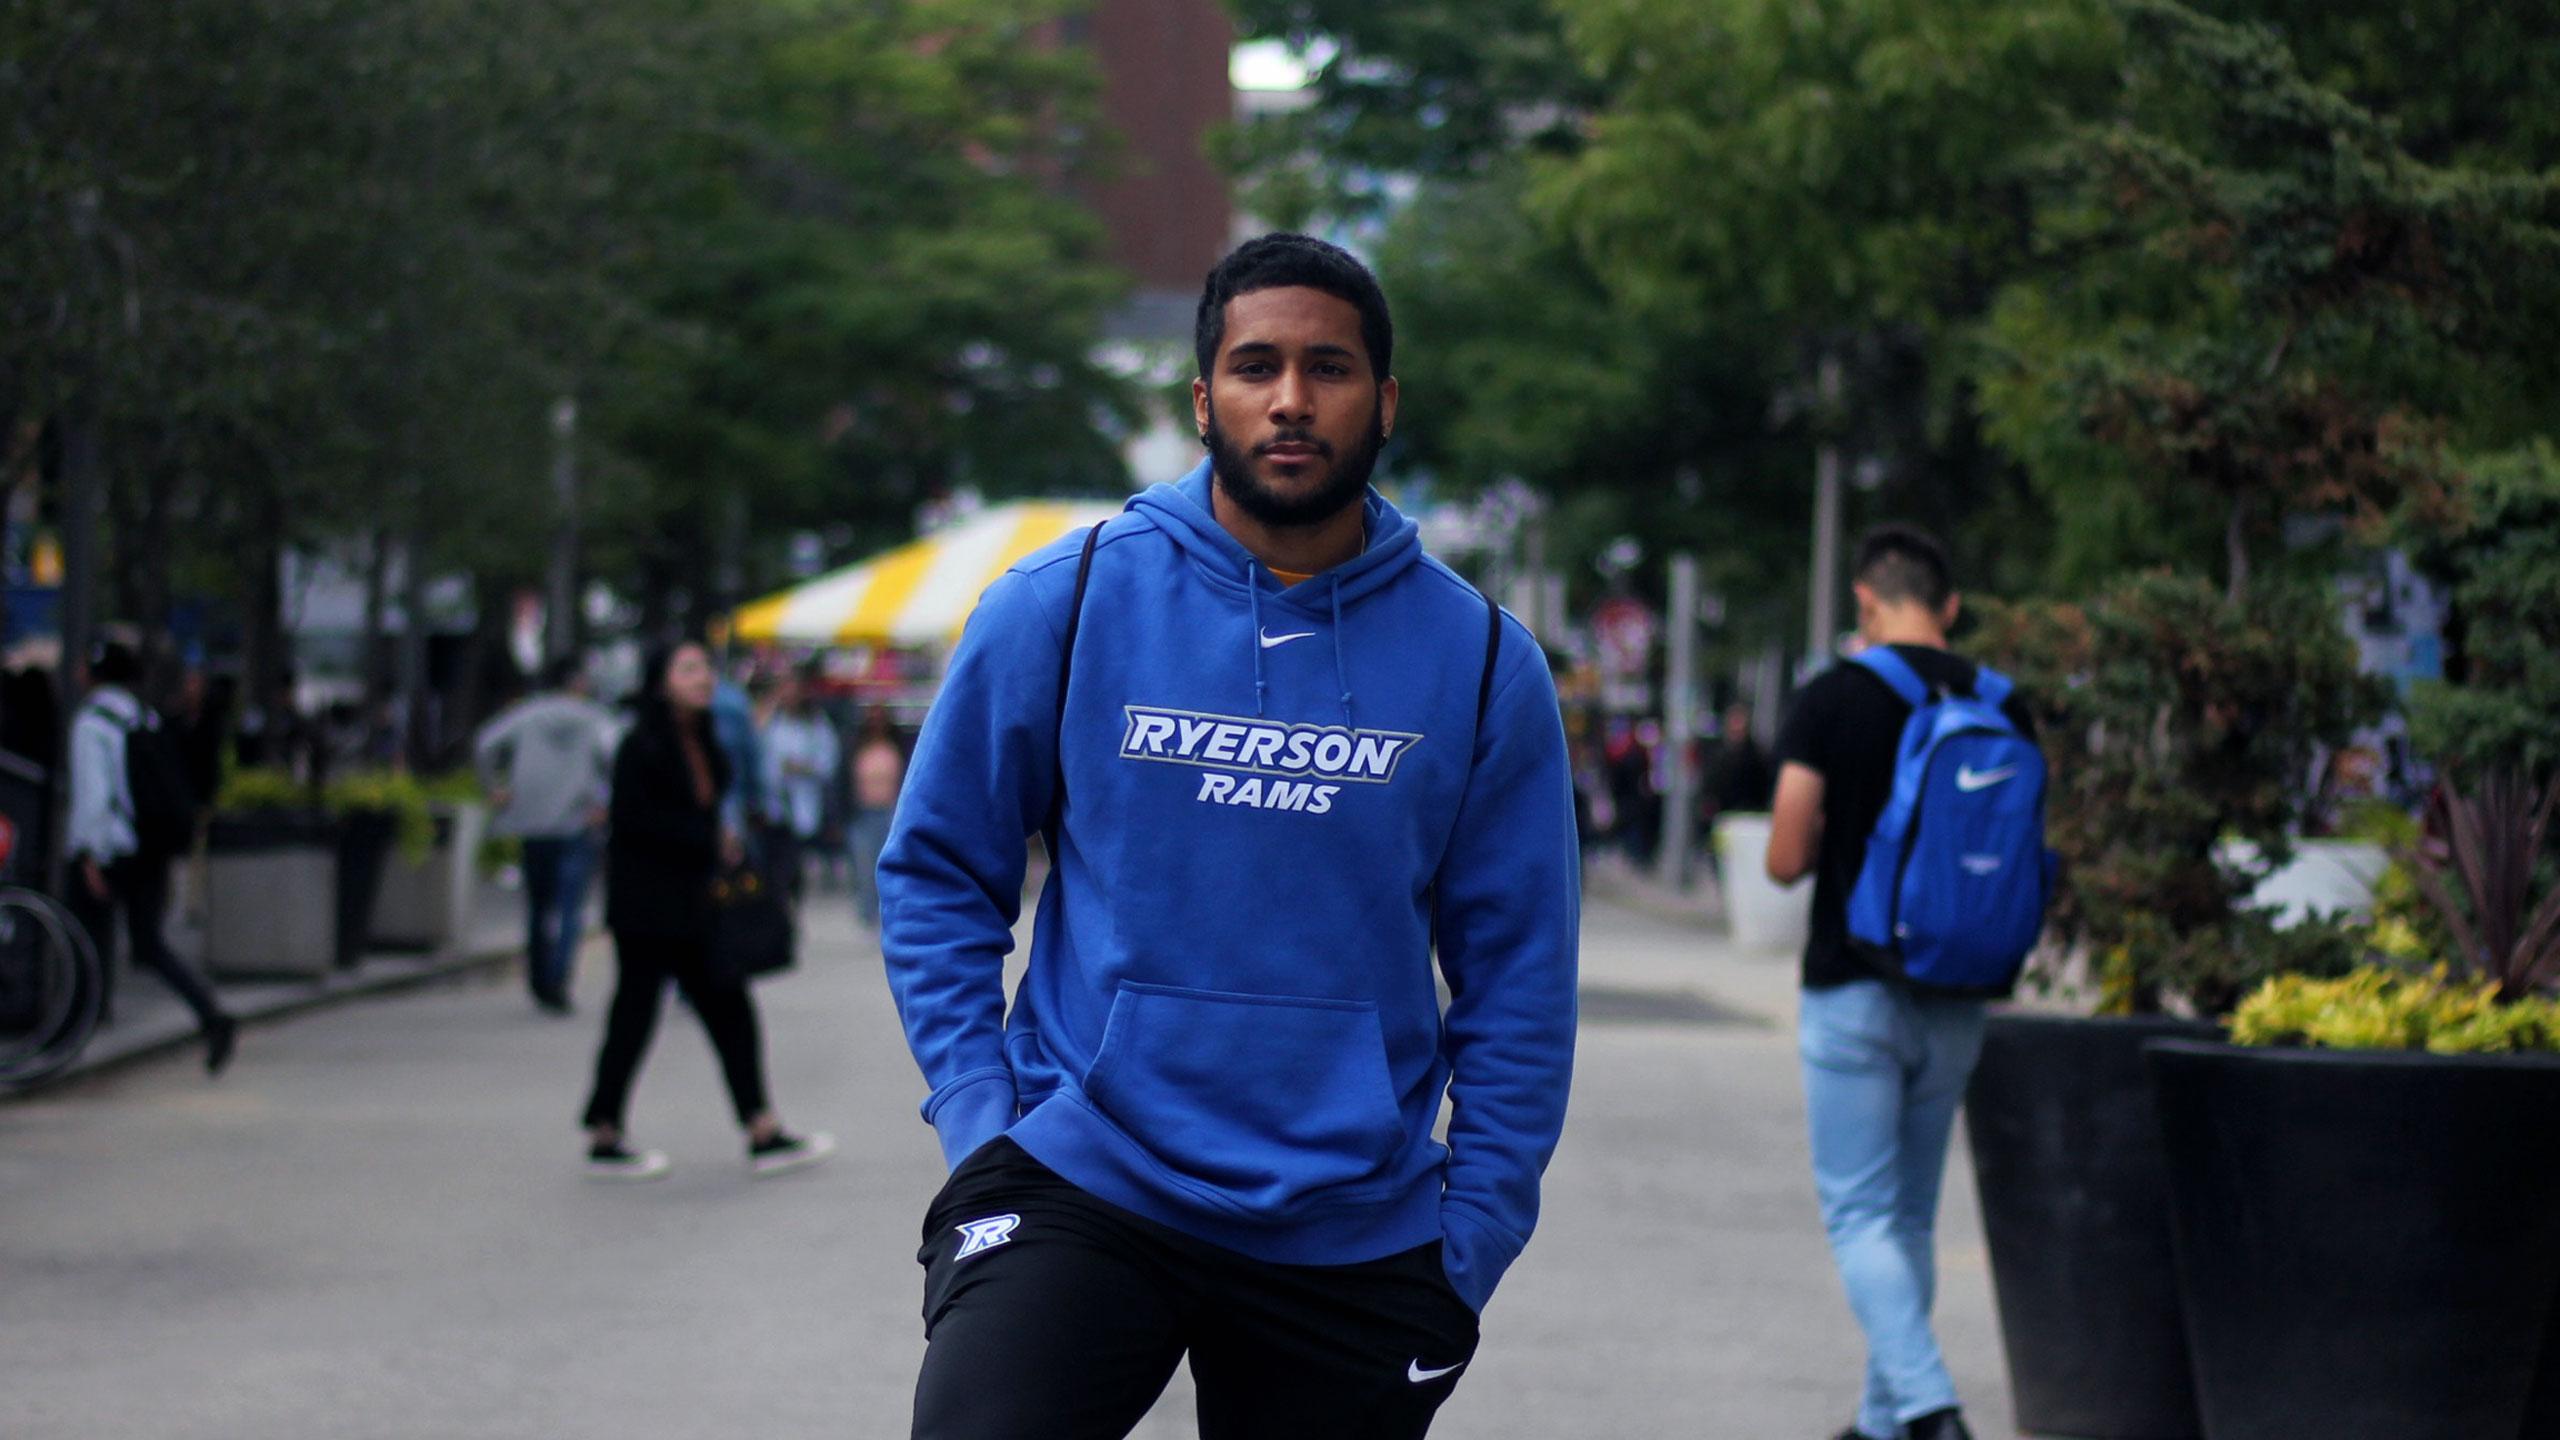 After a rollercoaster career, the Rams captain aims high in his final season at Ryerson. PHOTO: SARAH KRICHEL